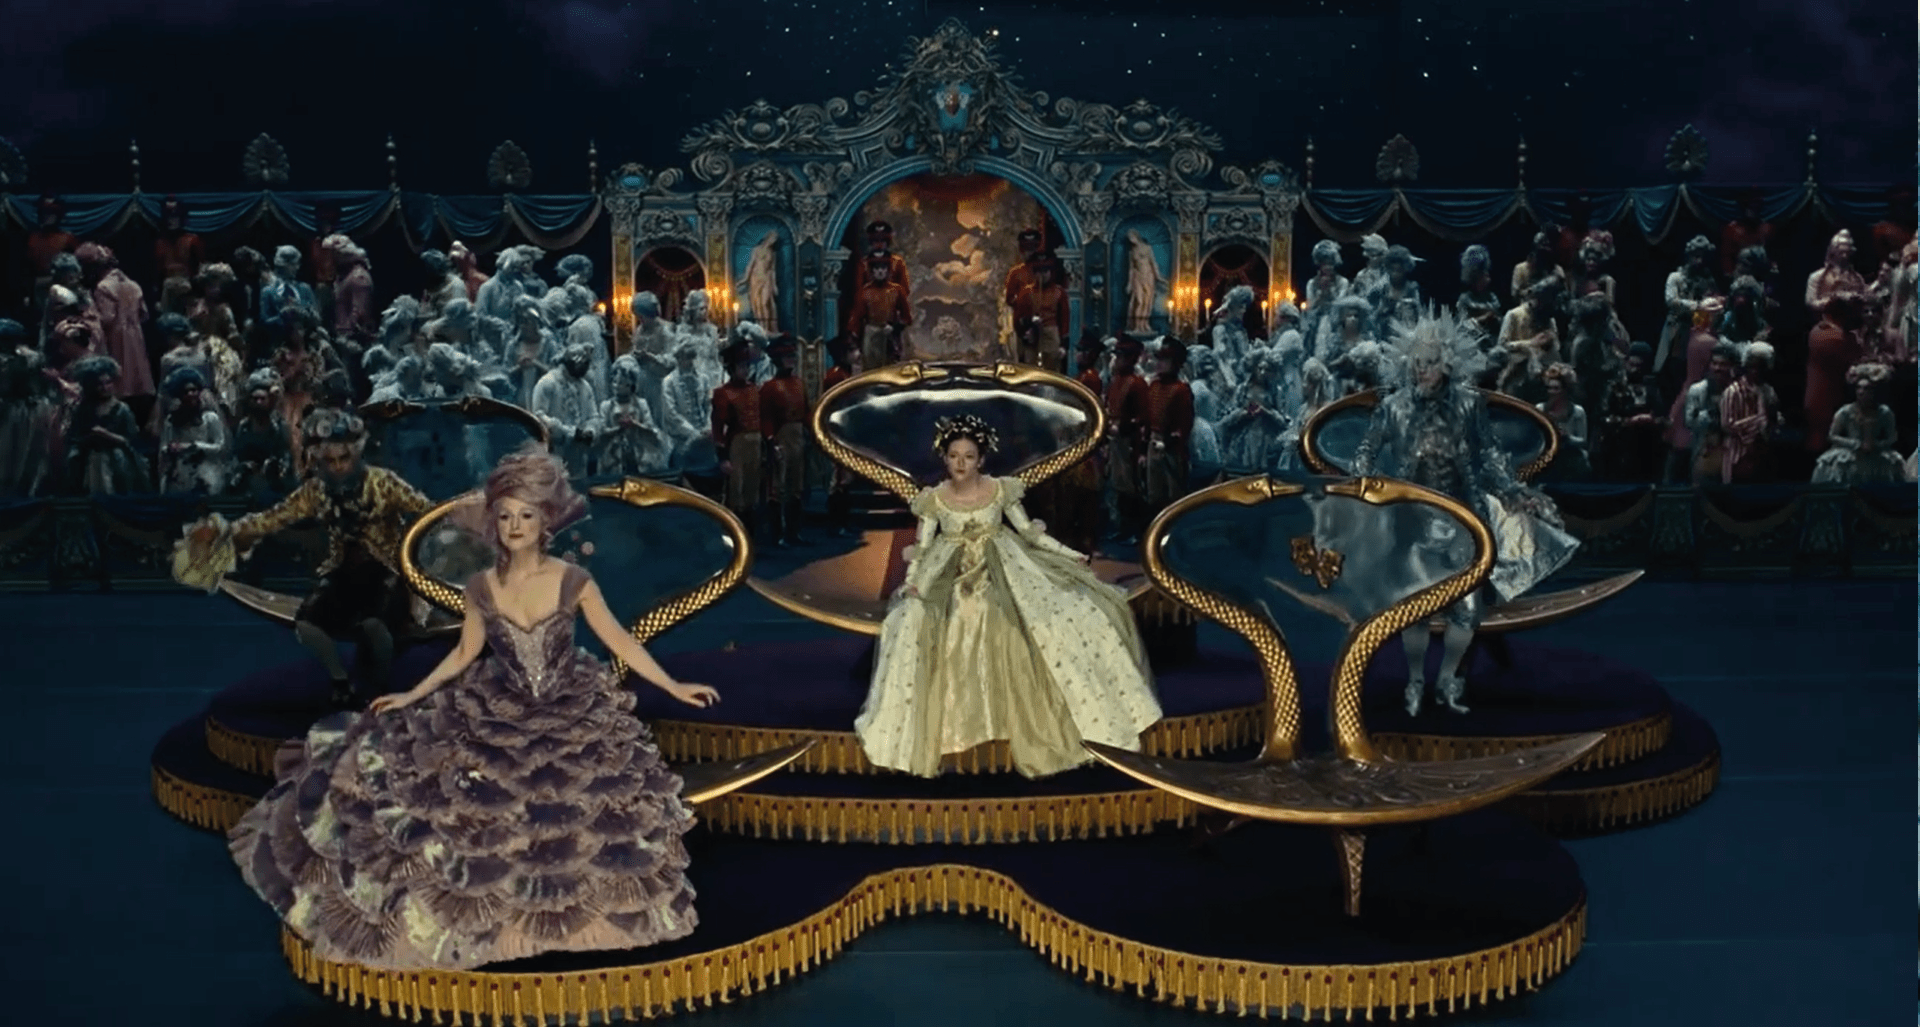 Exclusive: Disney's Big Holiday Release, “Nutcracker and the Four